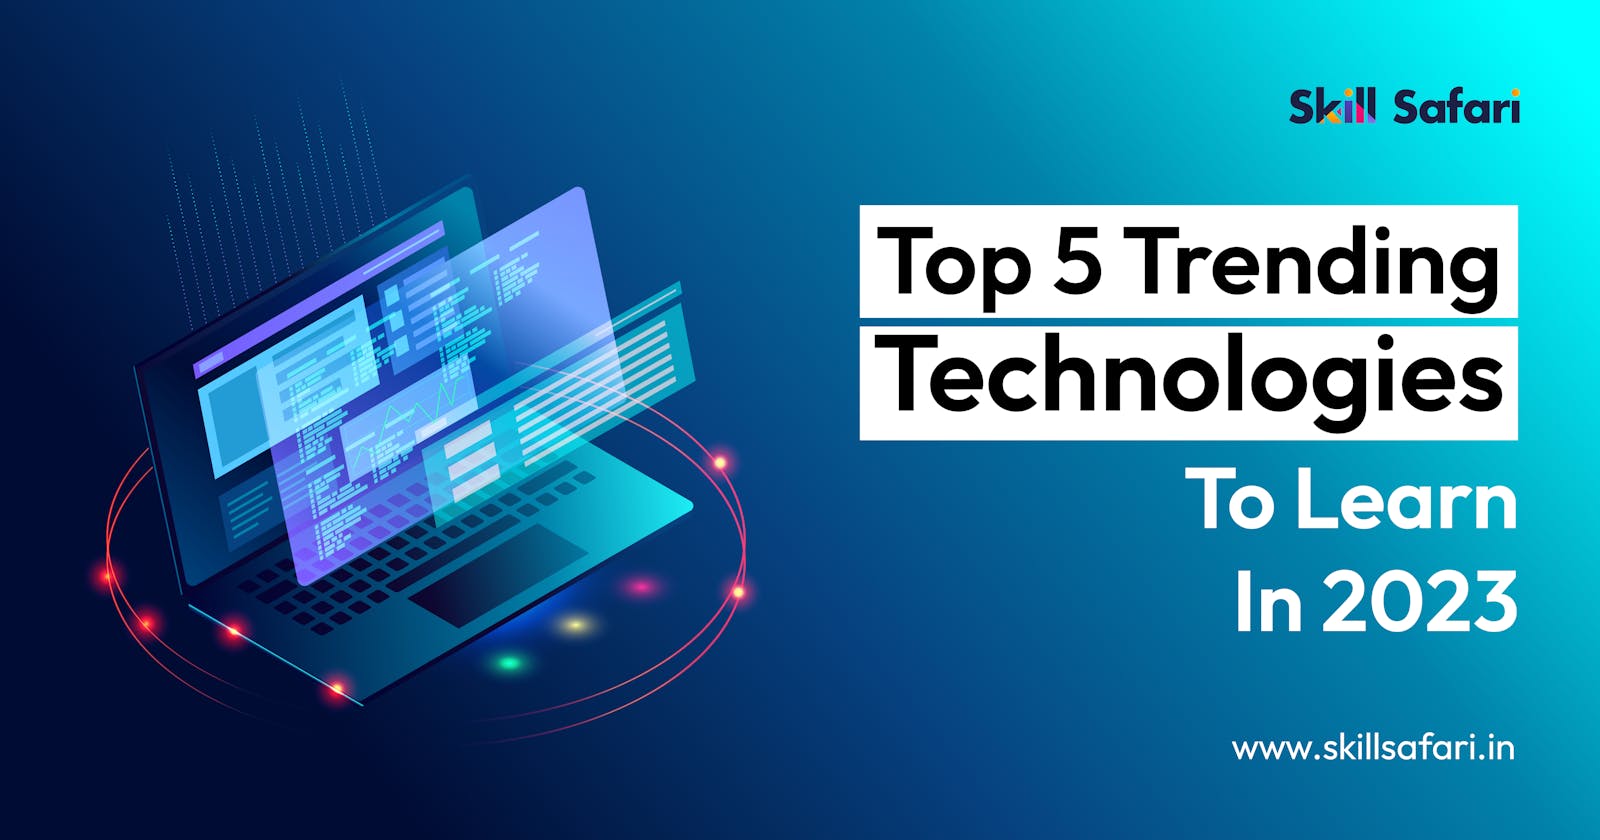 Top 5 Trending Technologies To Learn In 2023